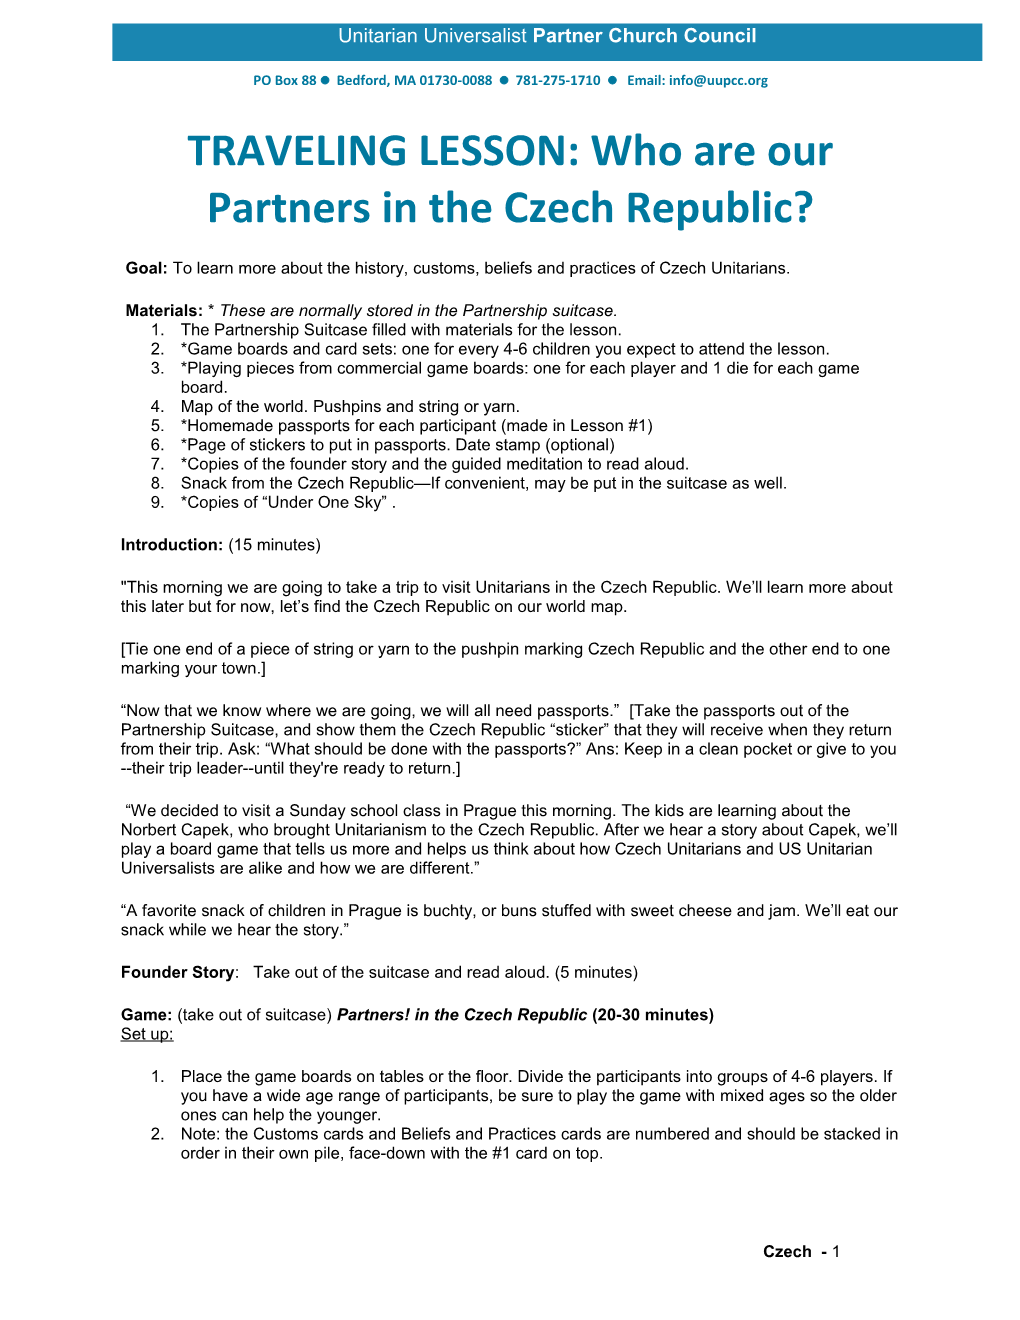 TRAVELING LESSON: Who Are Our Partners in the Czech Republic?